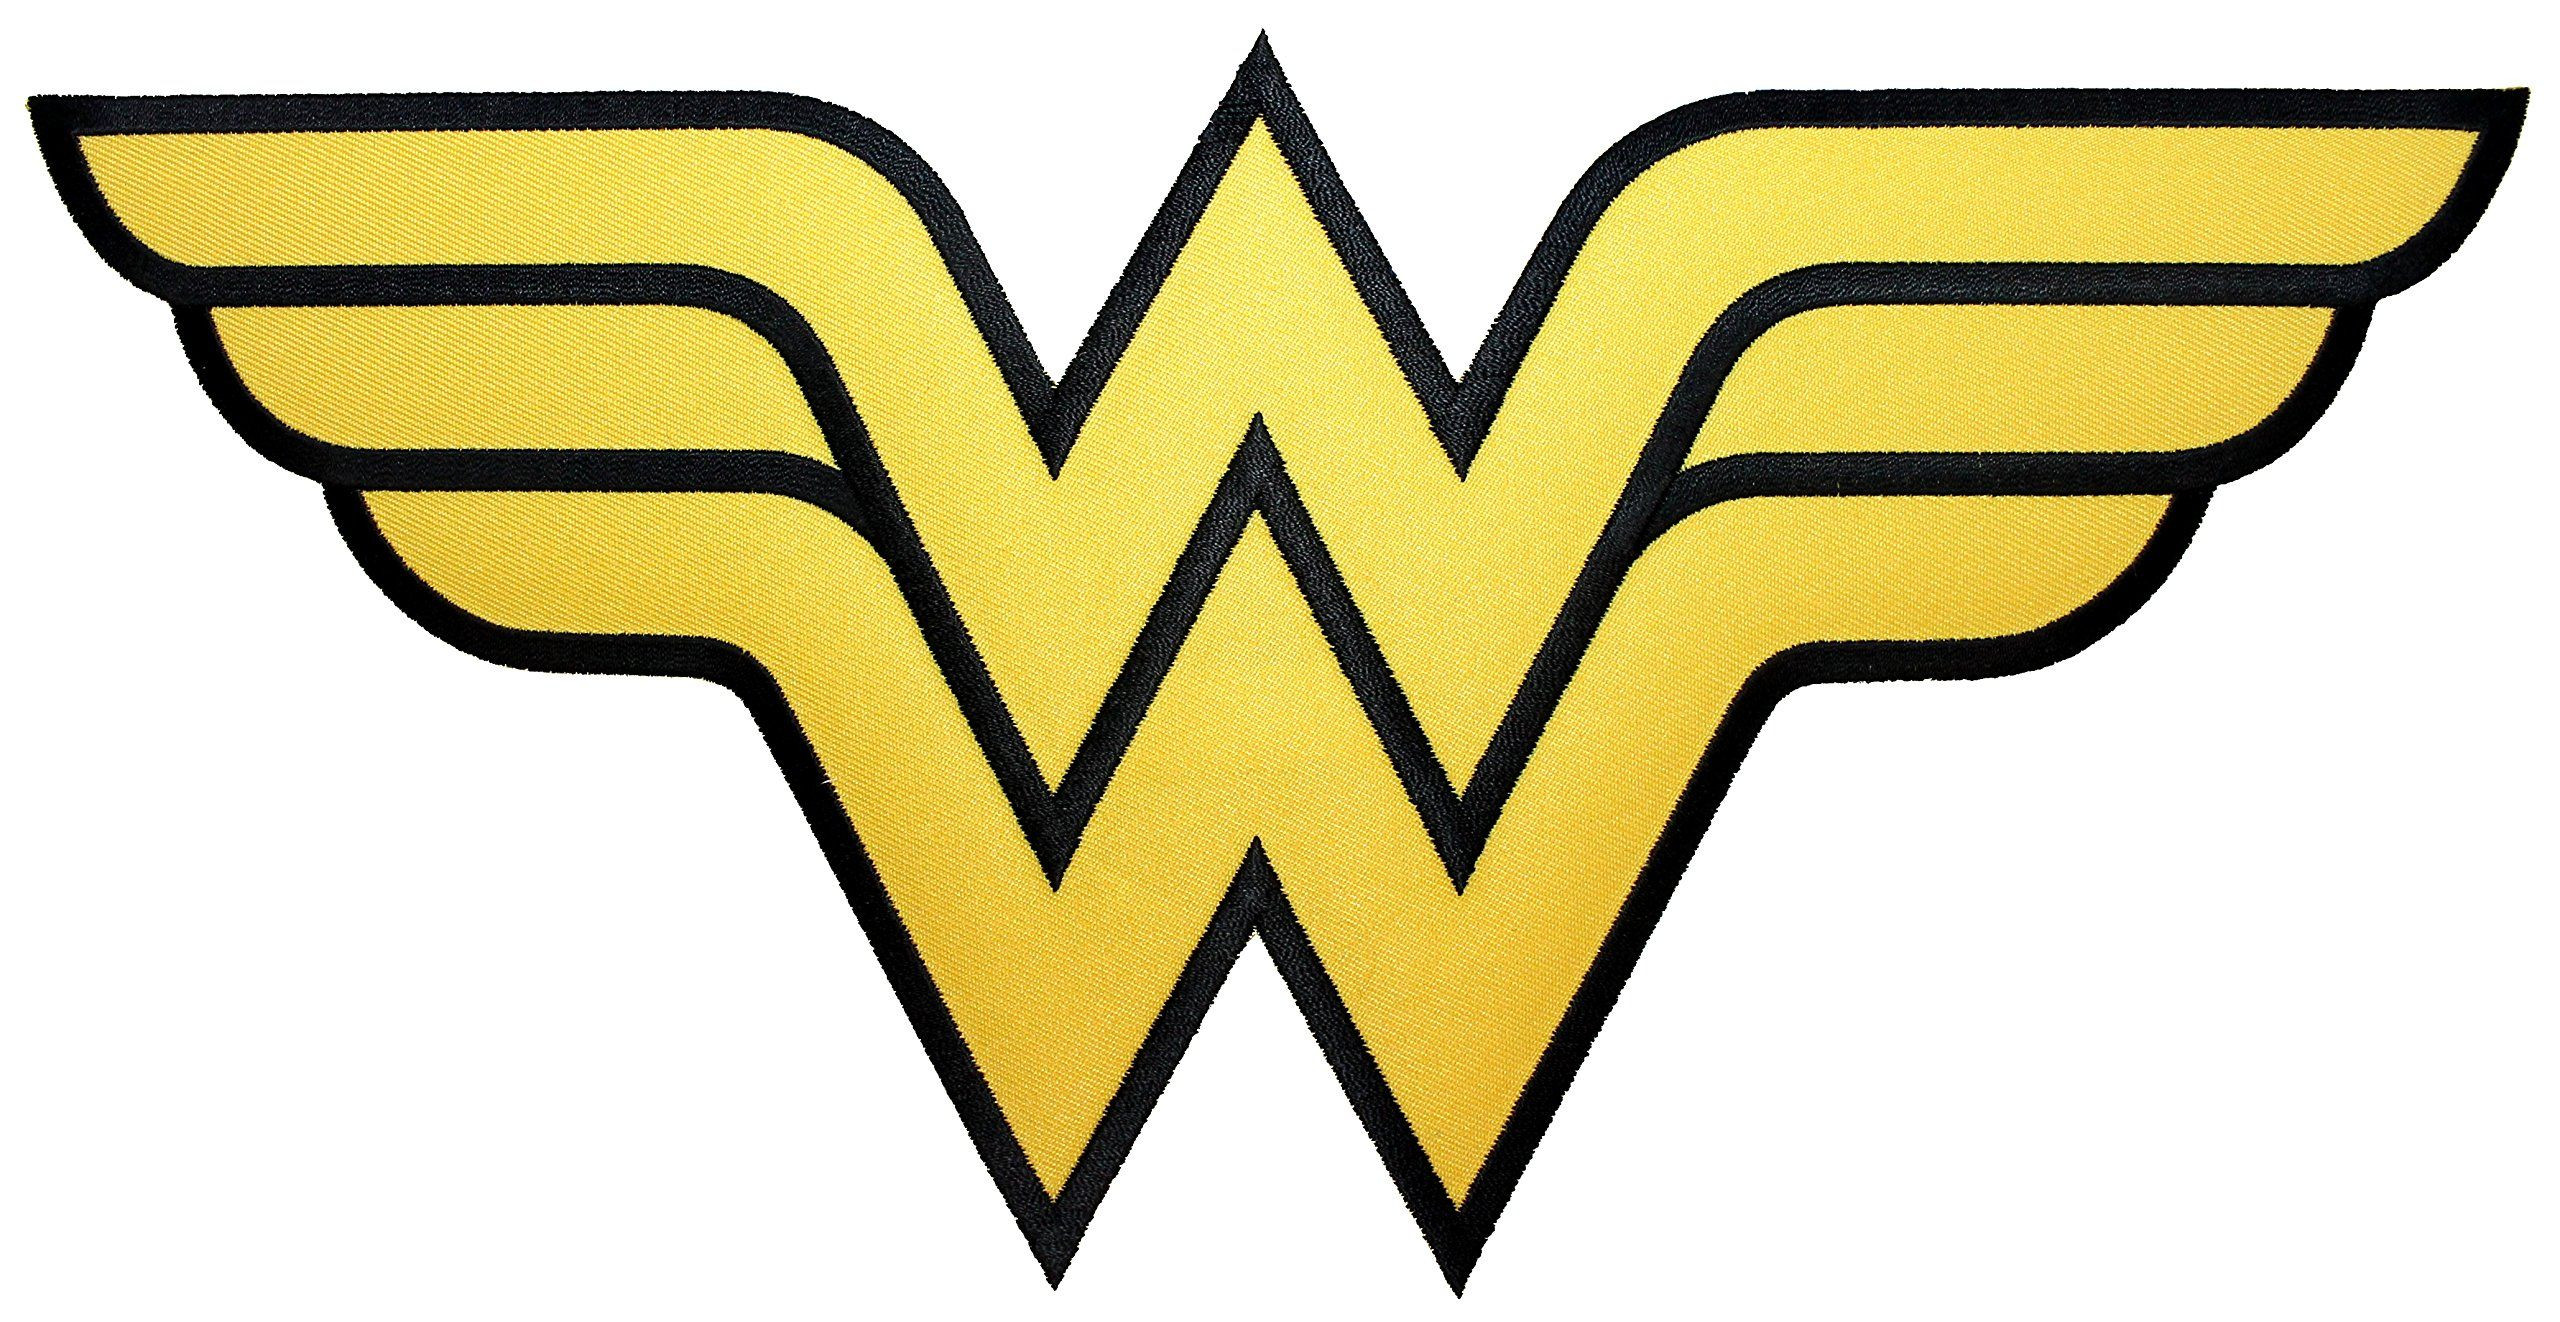 The best free Wonder woman silhouette images. Download from 10015 free ...